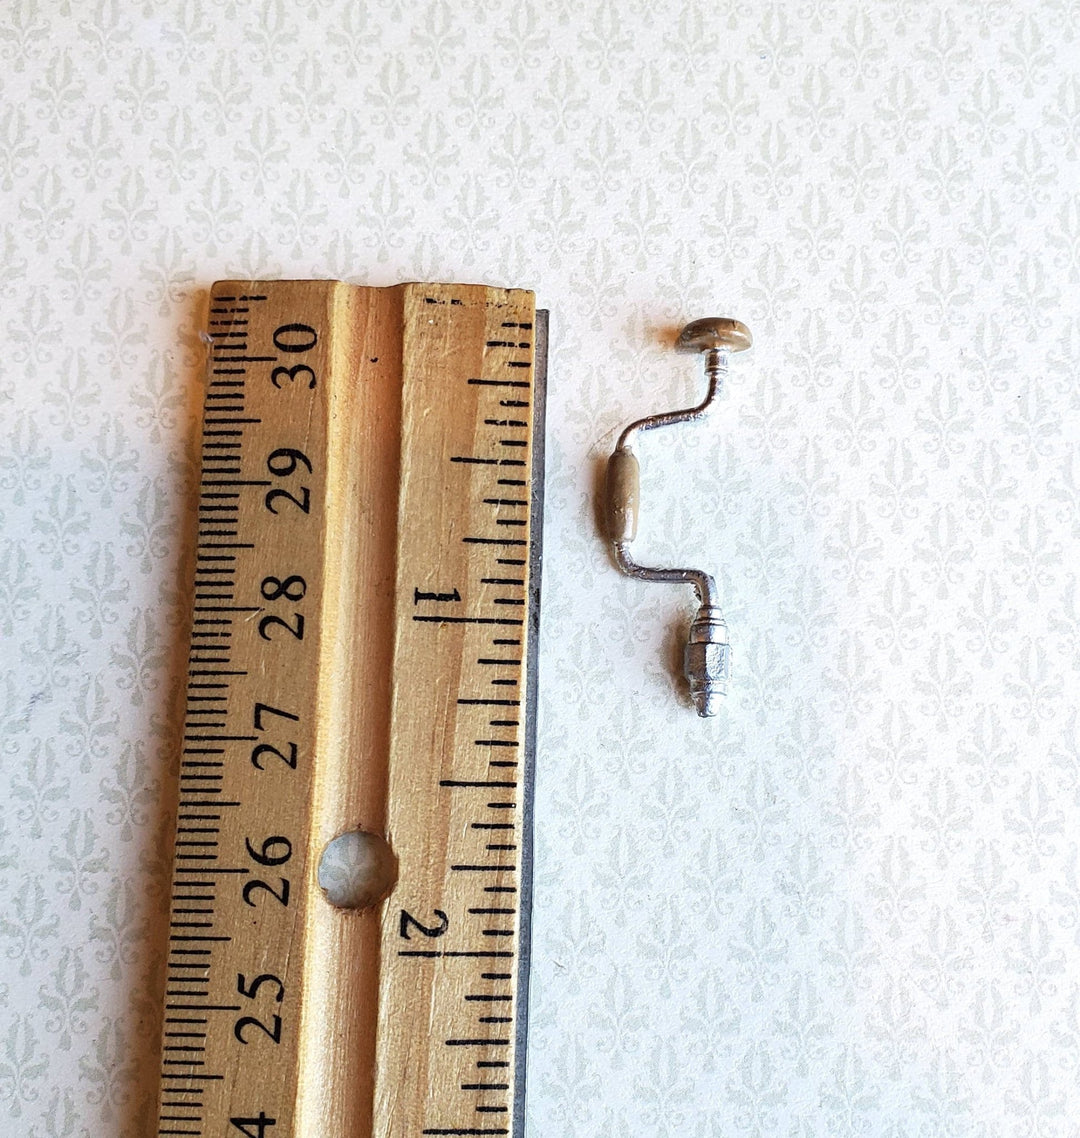 Dollhouse Miniature Hand Drill Auger Vintage Style 1:12 Scale Woodworking Tool Painted Metal - Miniature Crush